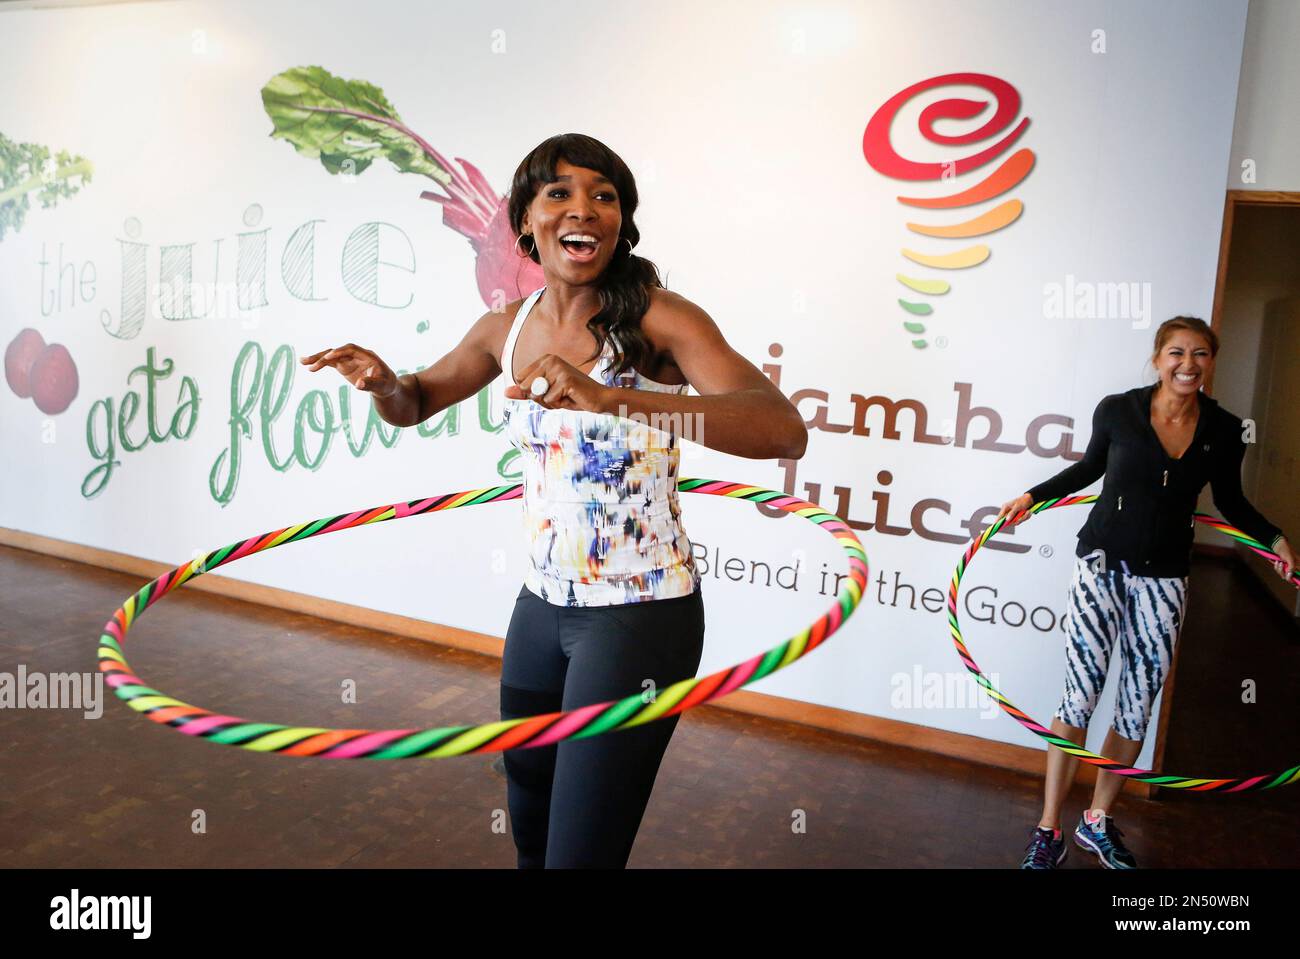 IMAGE DISTRIBUTED FOR JAMBA JUICE - Tennis superstar Venus Williams  participates in Hoopnotica, a fitness workout using hula hoops, as the host  of the fourth annual FiTrends Expo with Jamba Juice at